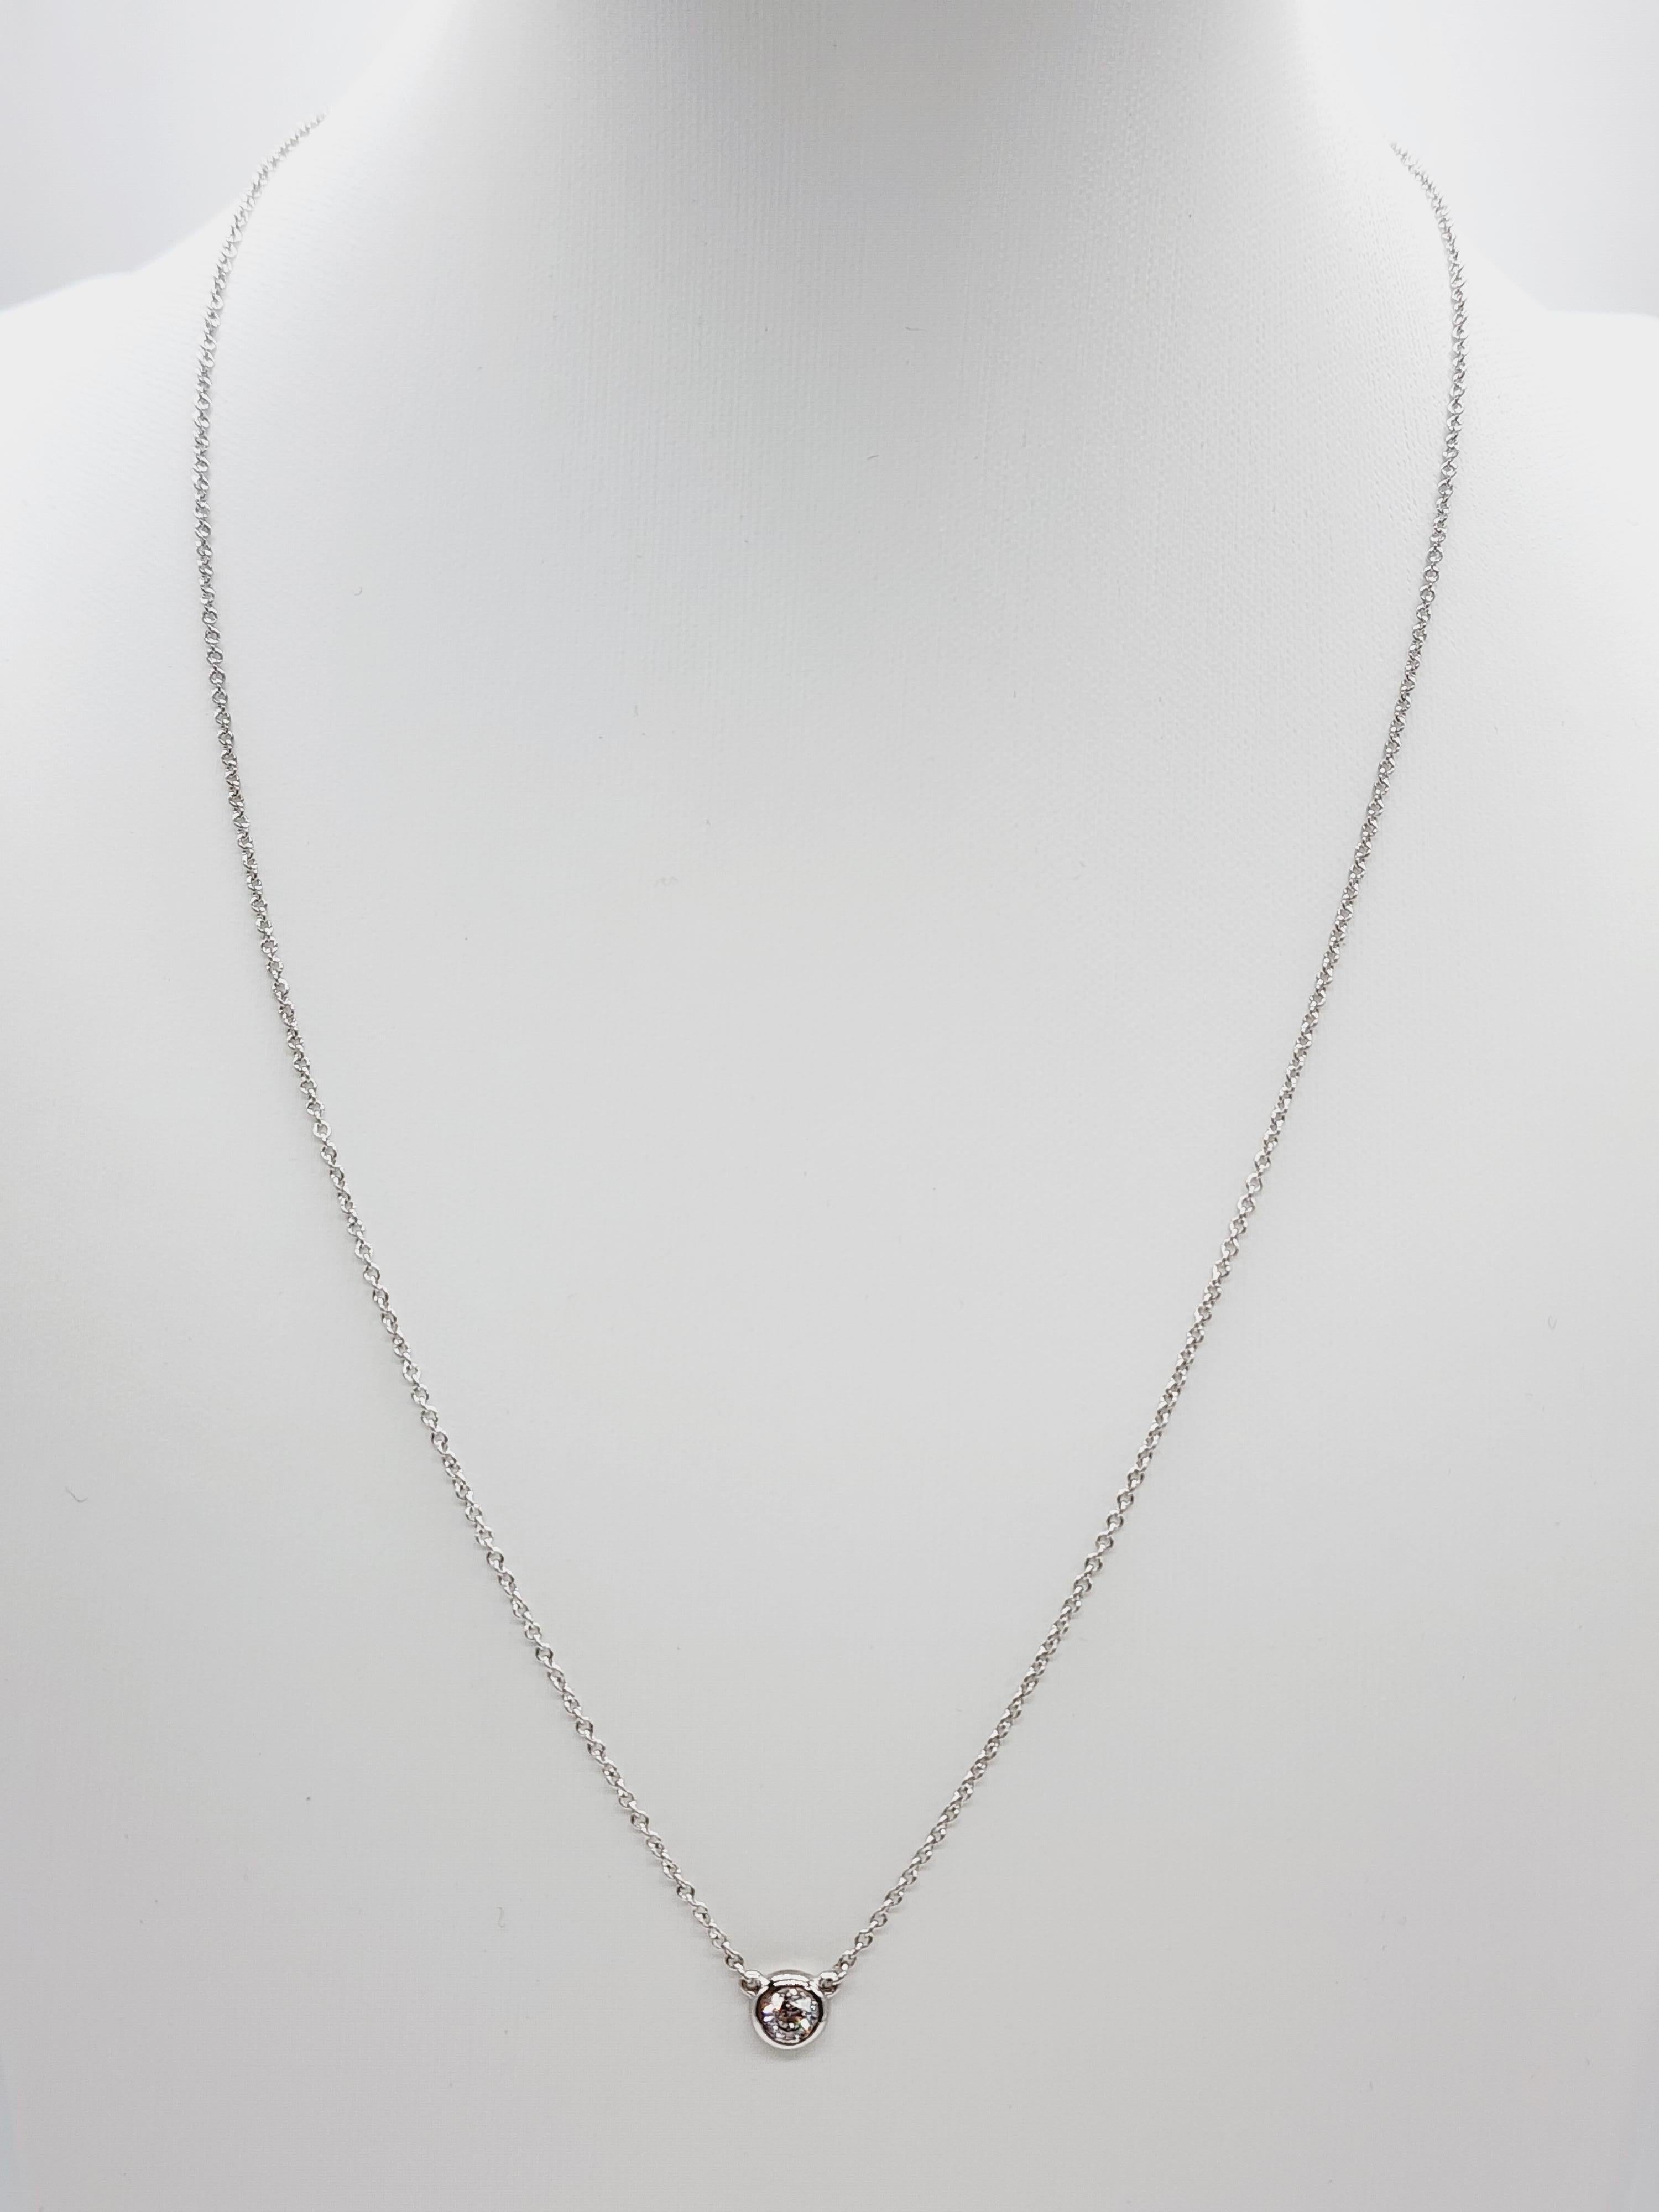 Single Station Diamond by the yard necklace set in Italian made 14K white gold. 
Total weight is 0.24 carats. Beautiful shiny natural diamond. 
Total length is 18 inch. Average Color/Clarity D/VS